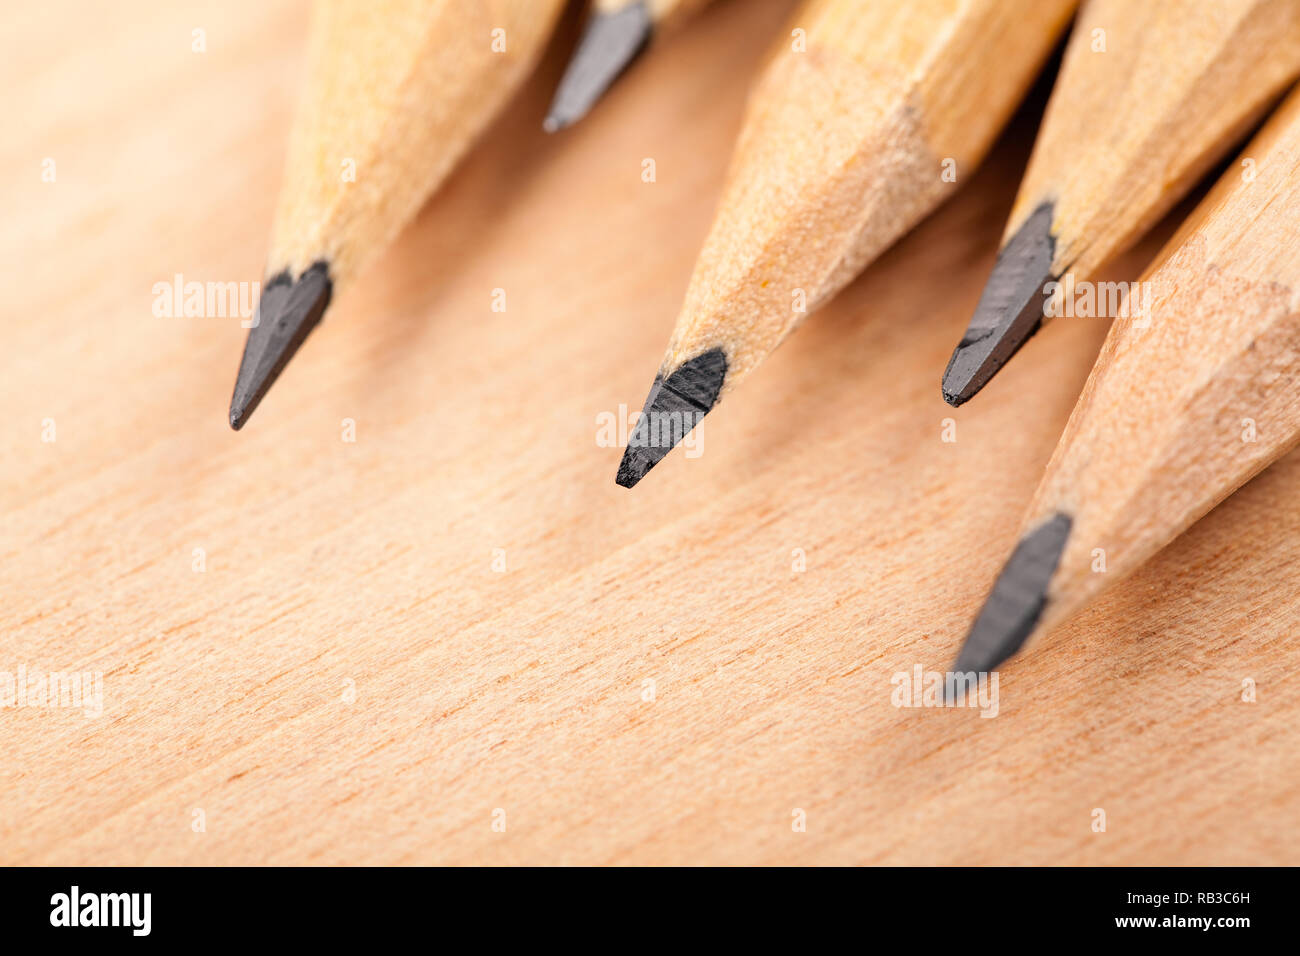 detail of a pencil tip Stock Photo